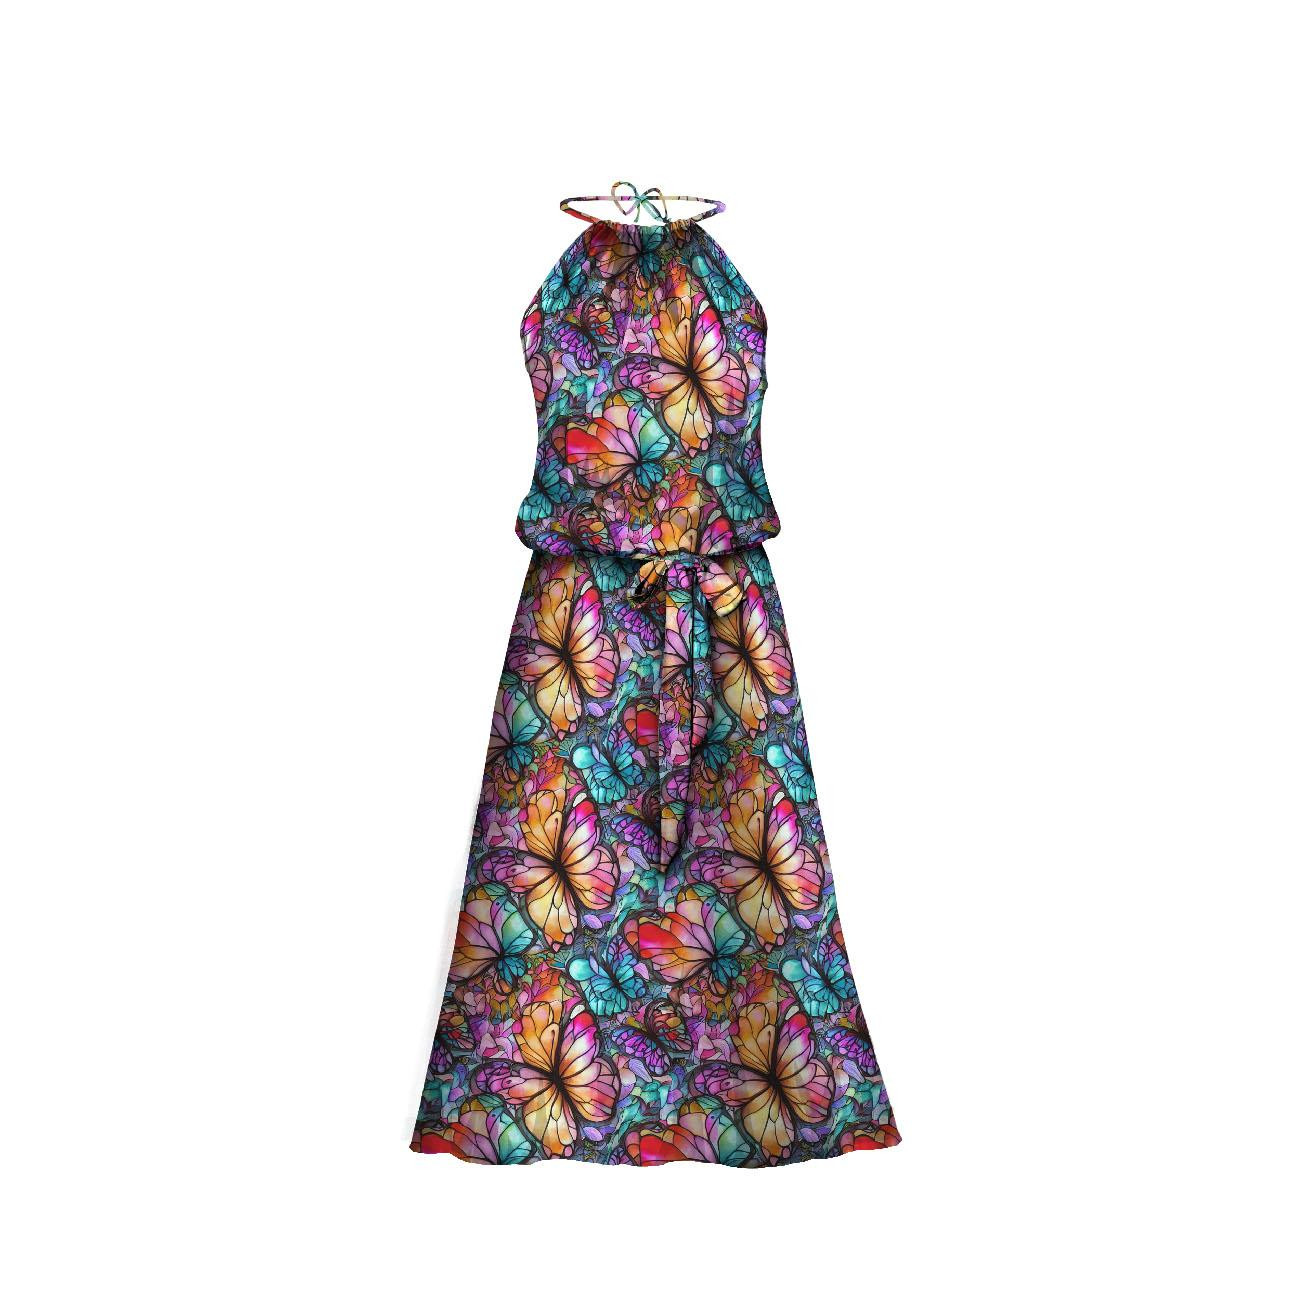 DRESS "DALIA" MAXI - BUTTERFLIES / STAINED GLASS - sewing set